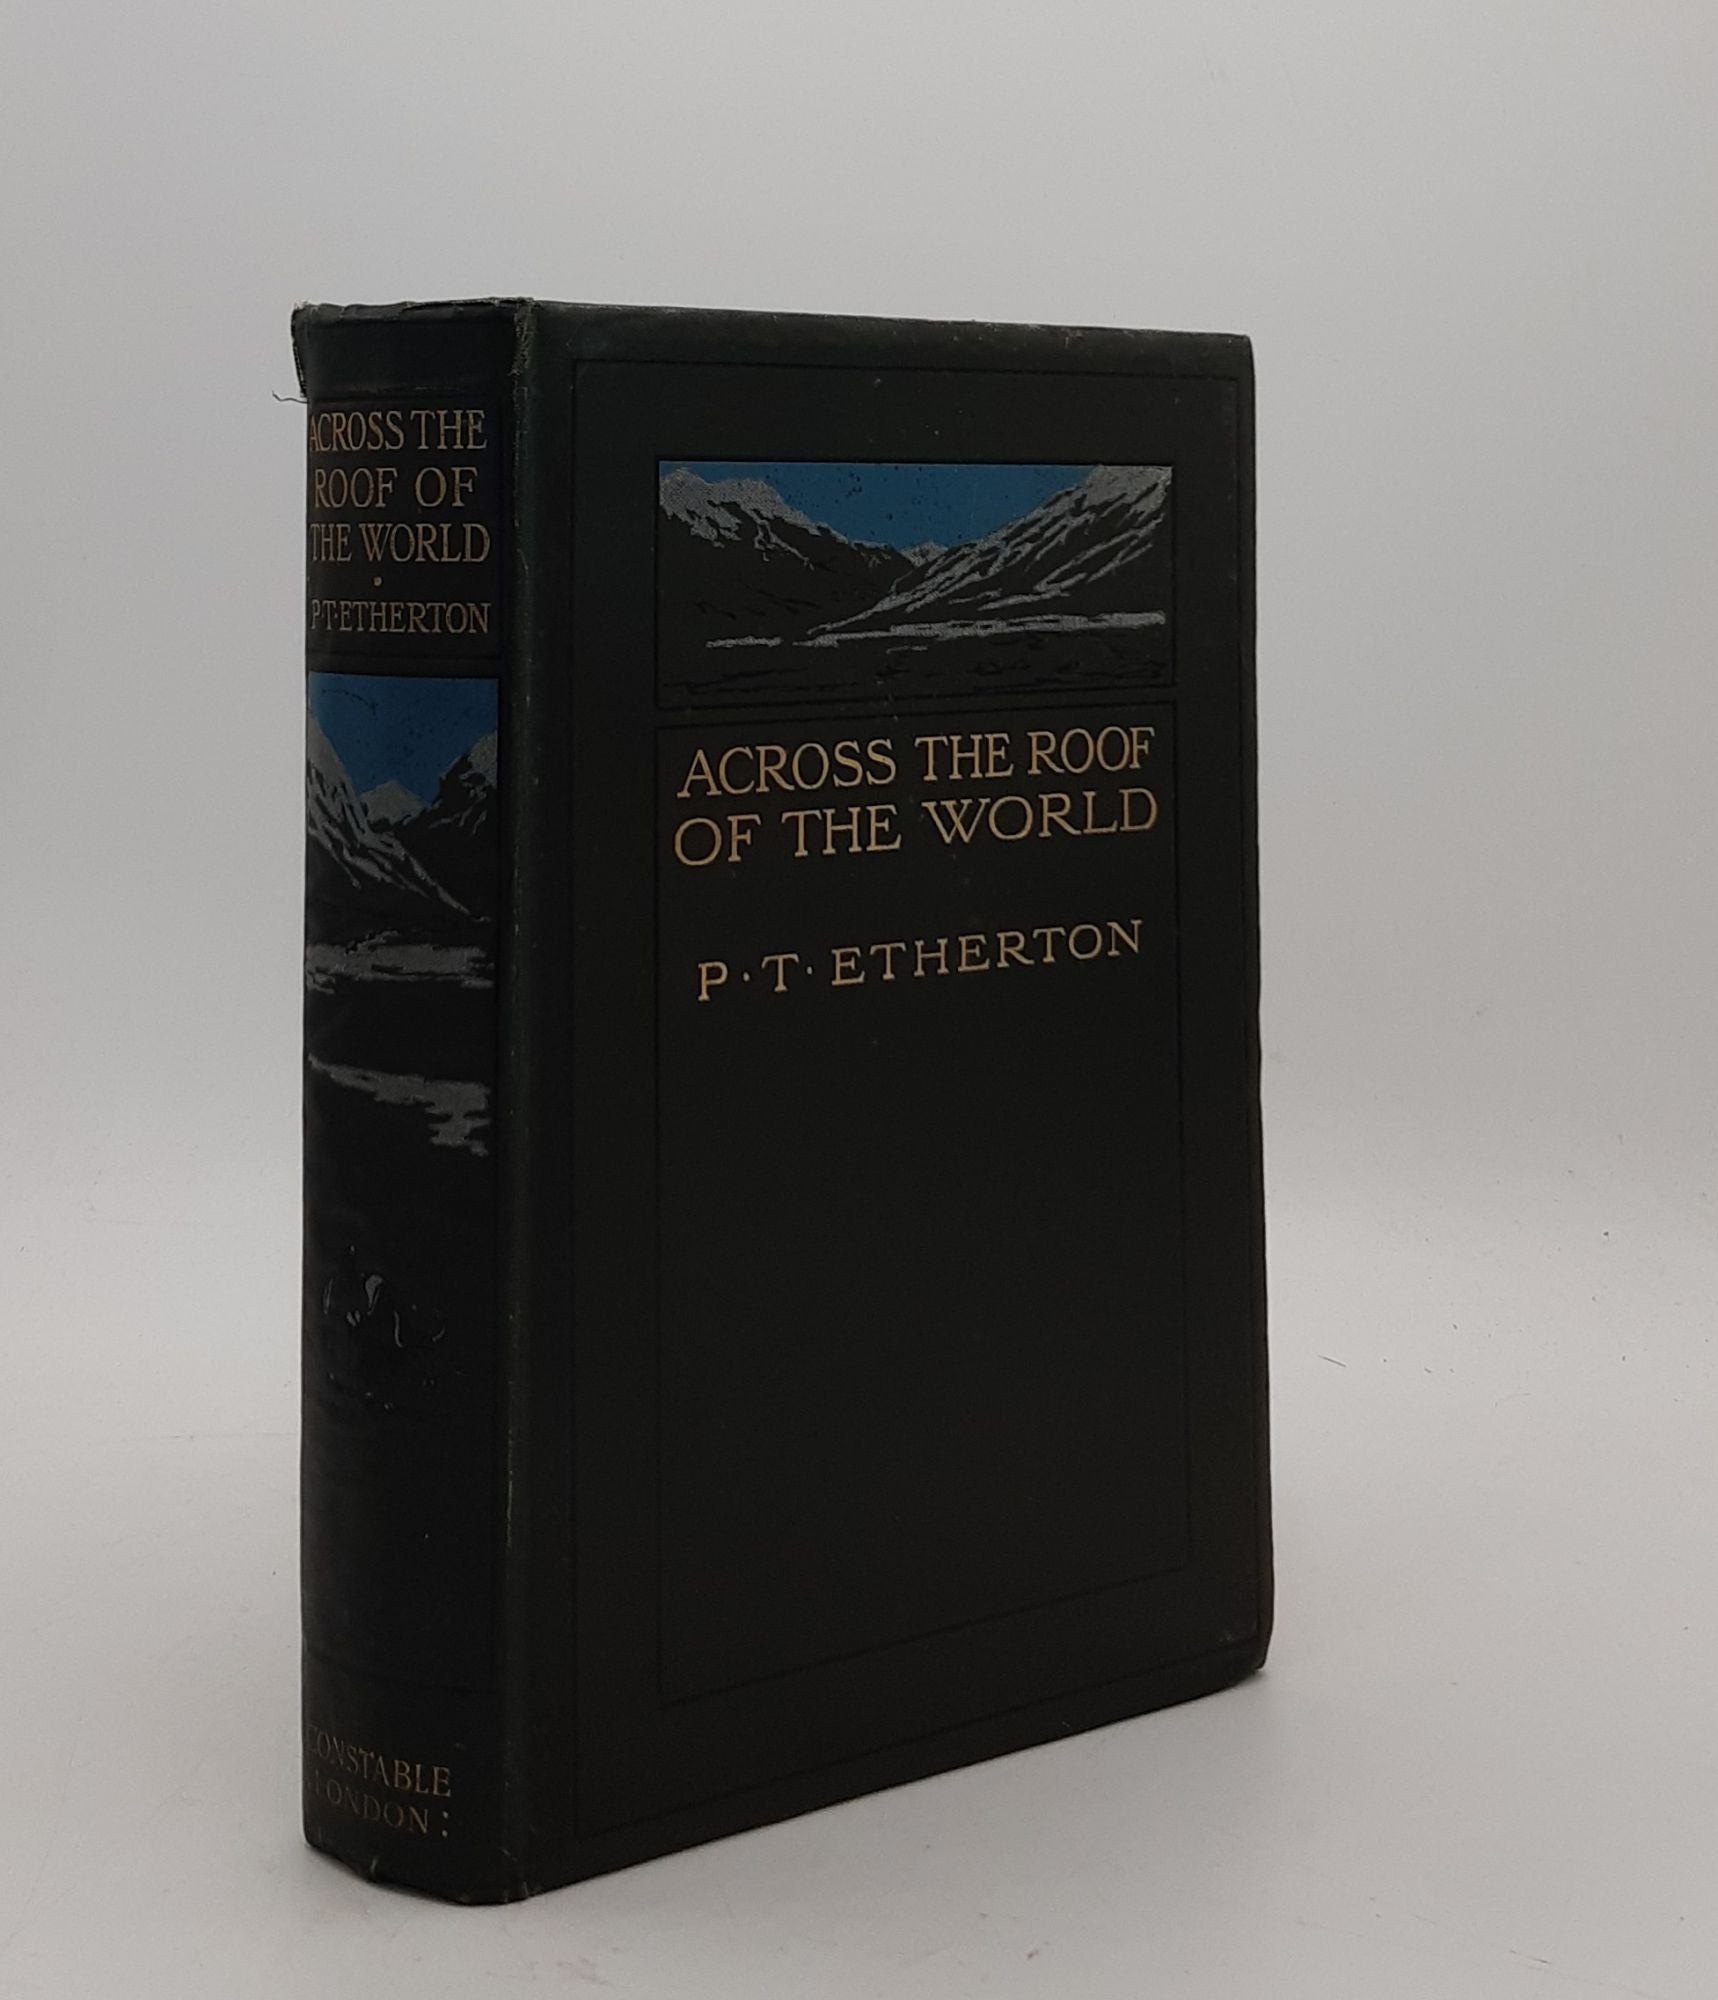 ETHERTON P.T. - Across the Roof of the World a Record of Sport and Travel Through Kashmir Gilgit Hunza the Pamirs Chinese Turkistan Mongolia and Siberia